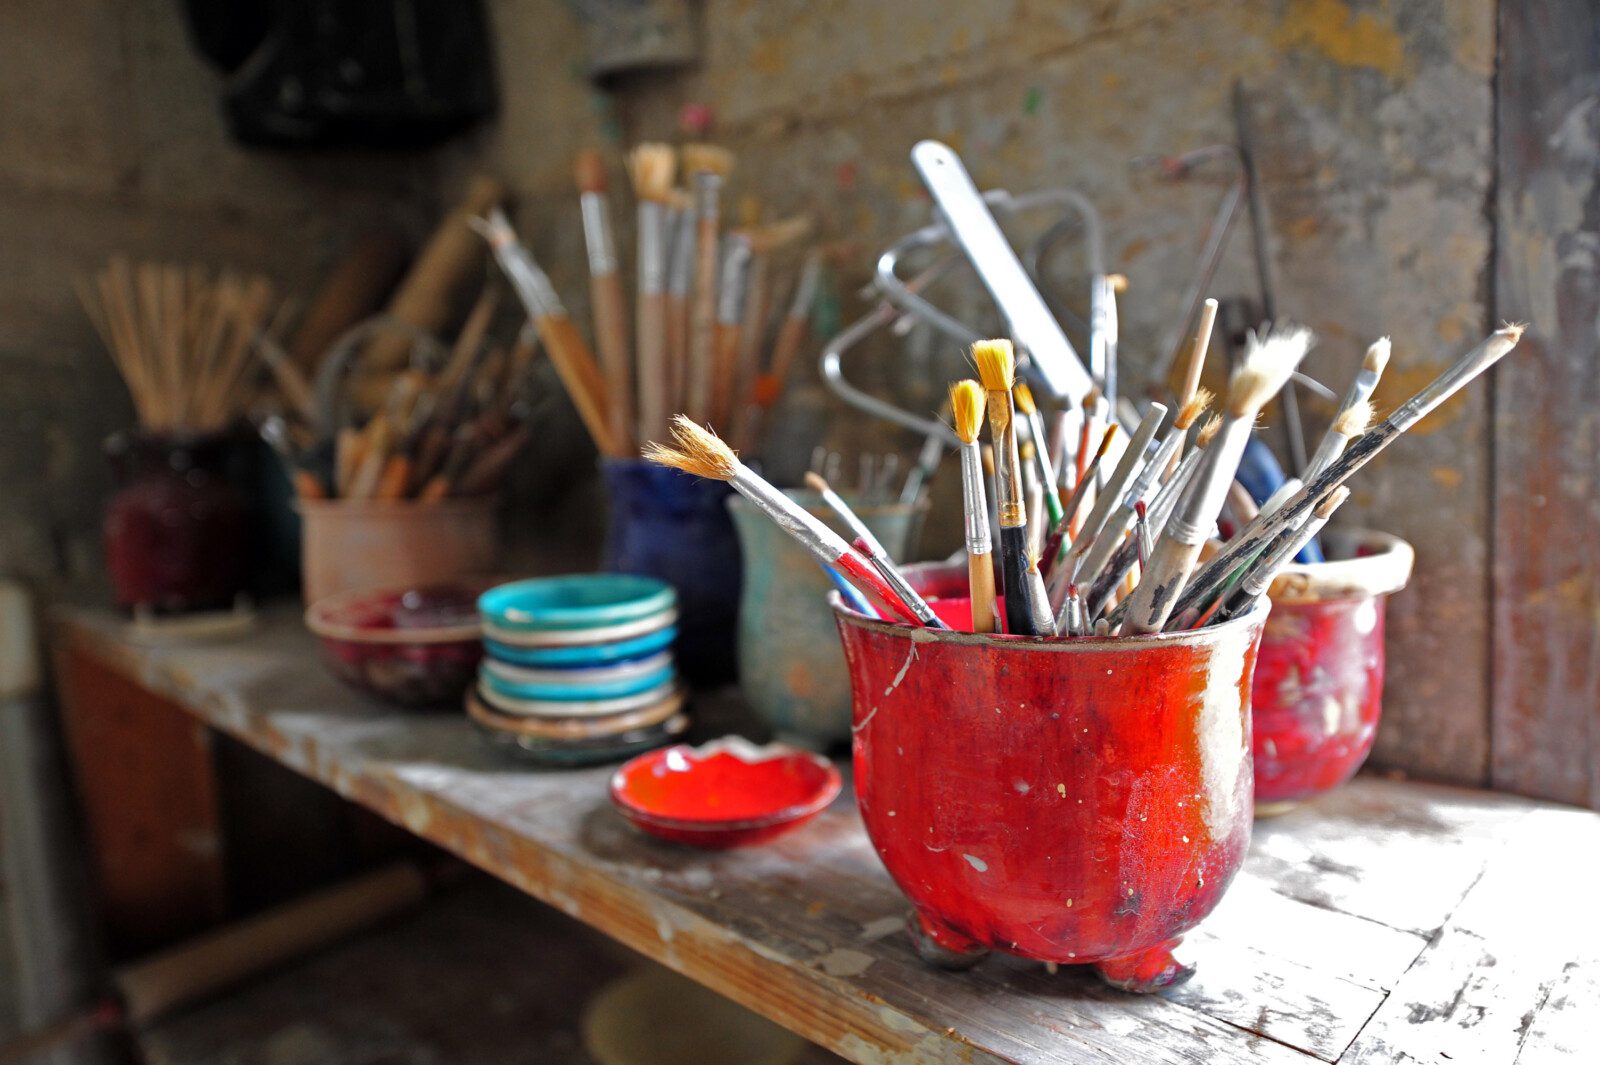 Large group of brushes in art studio. Creativity concept. No people. Copy space